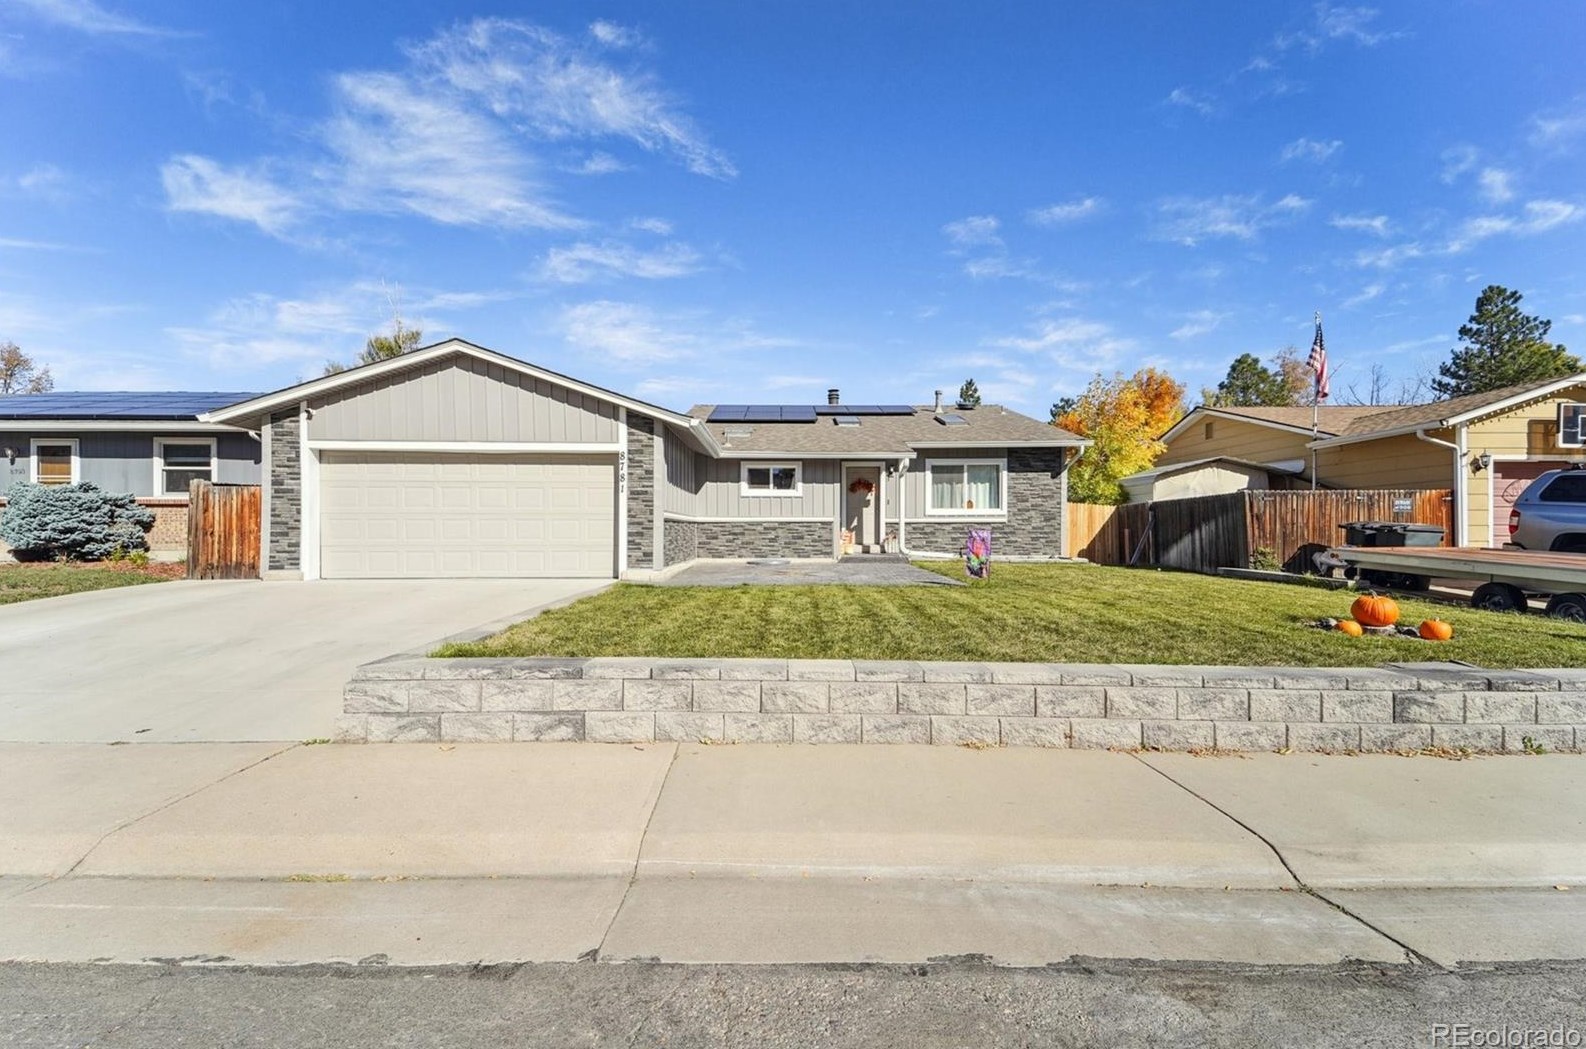 8781 86th Dr, Arvada, CO 80005